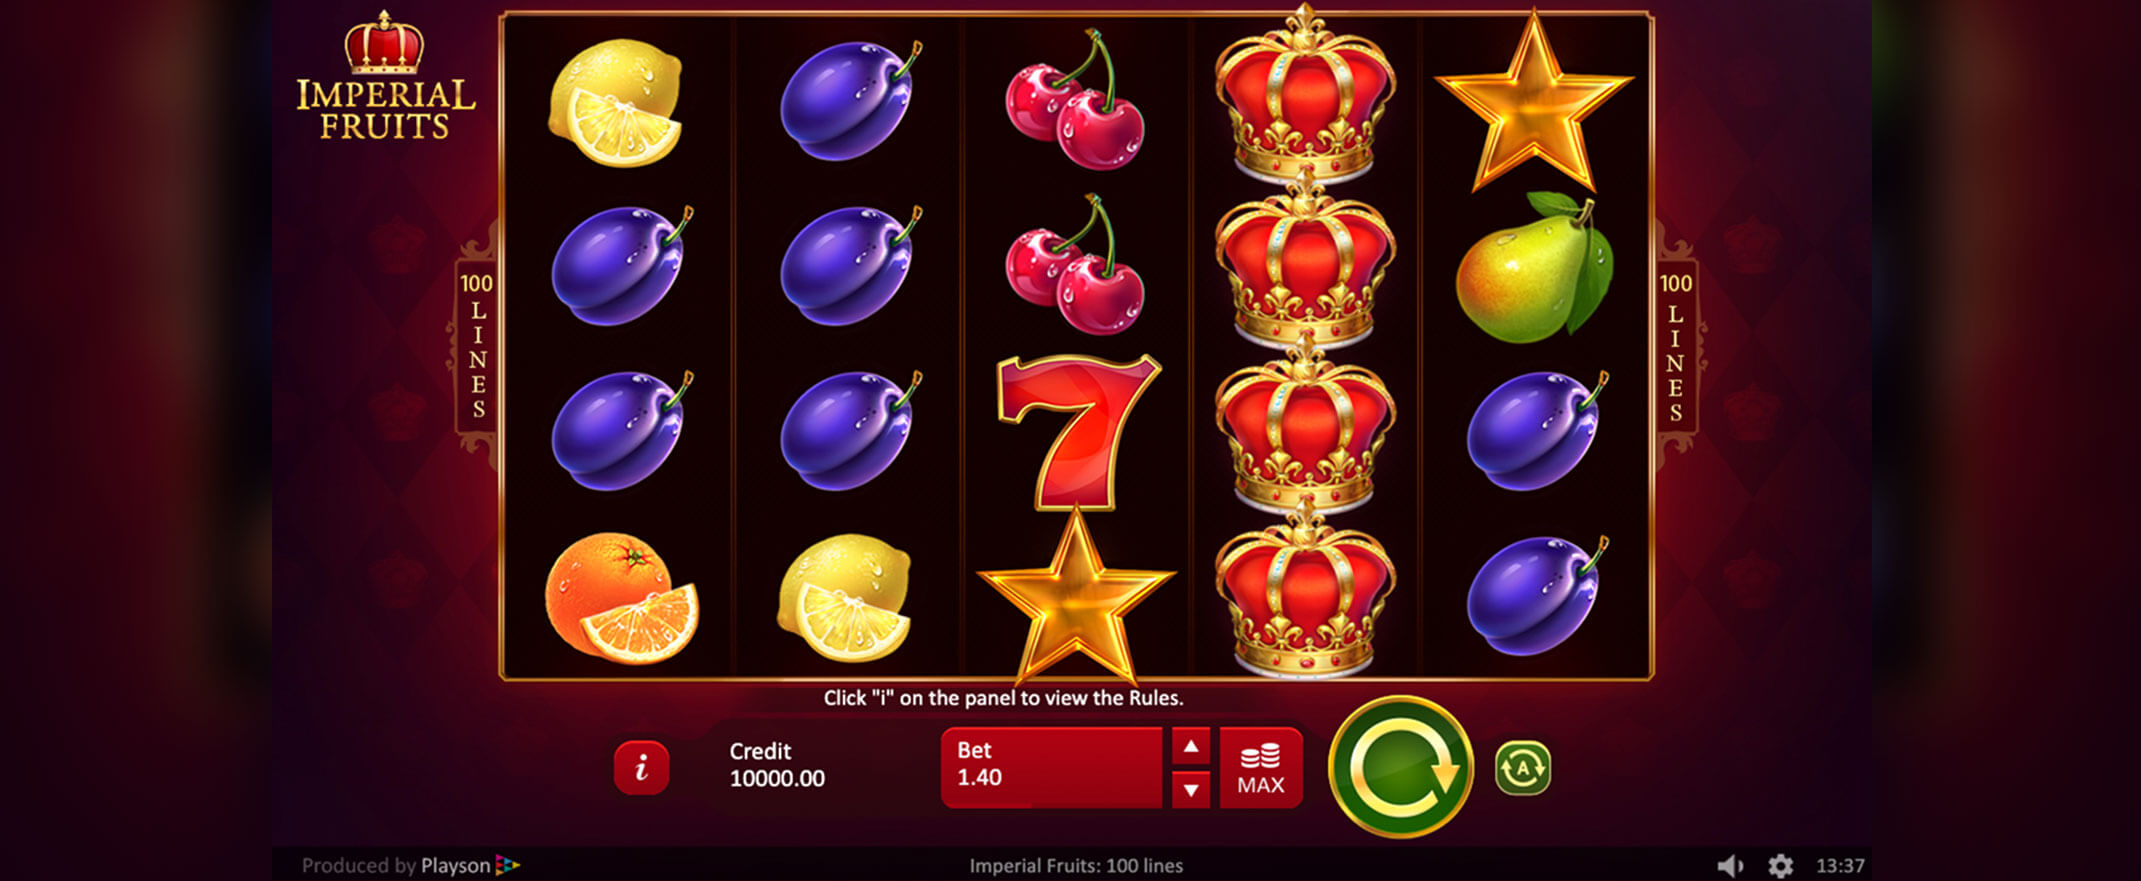 Imperial Fruits Slot